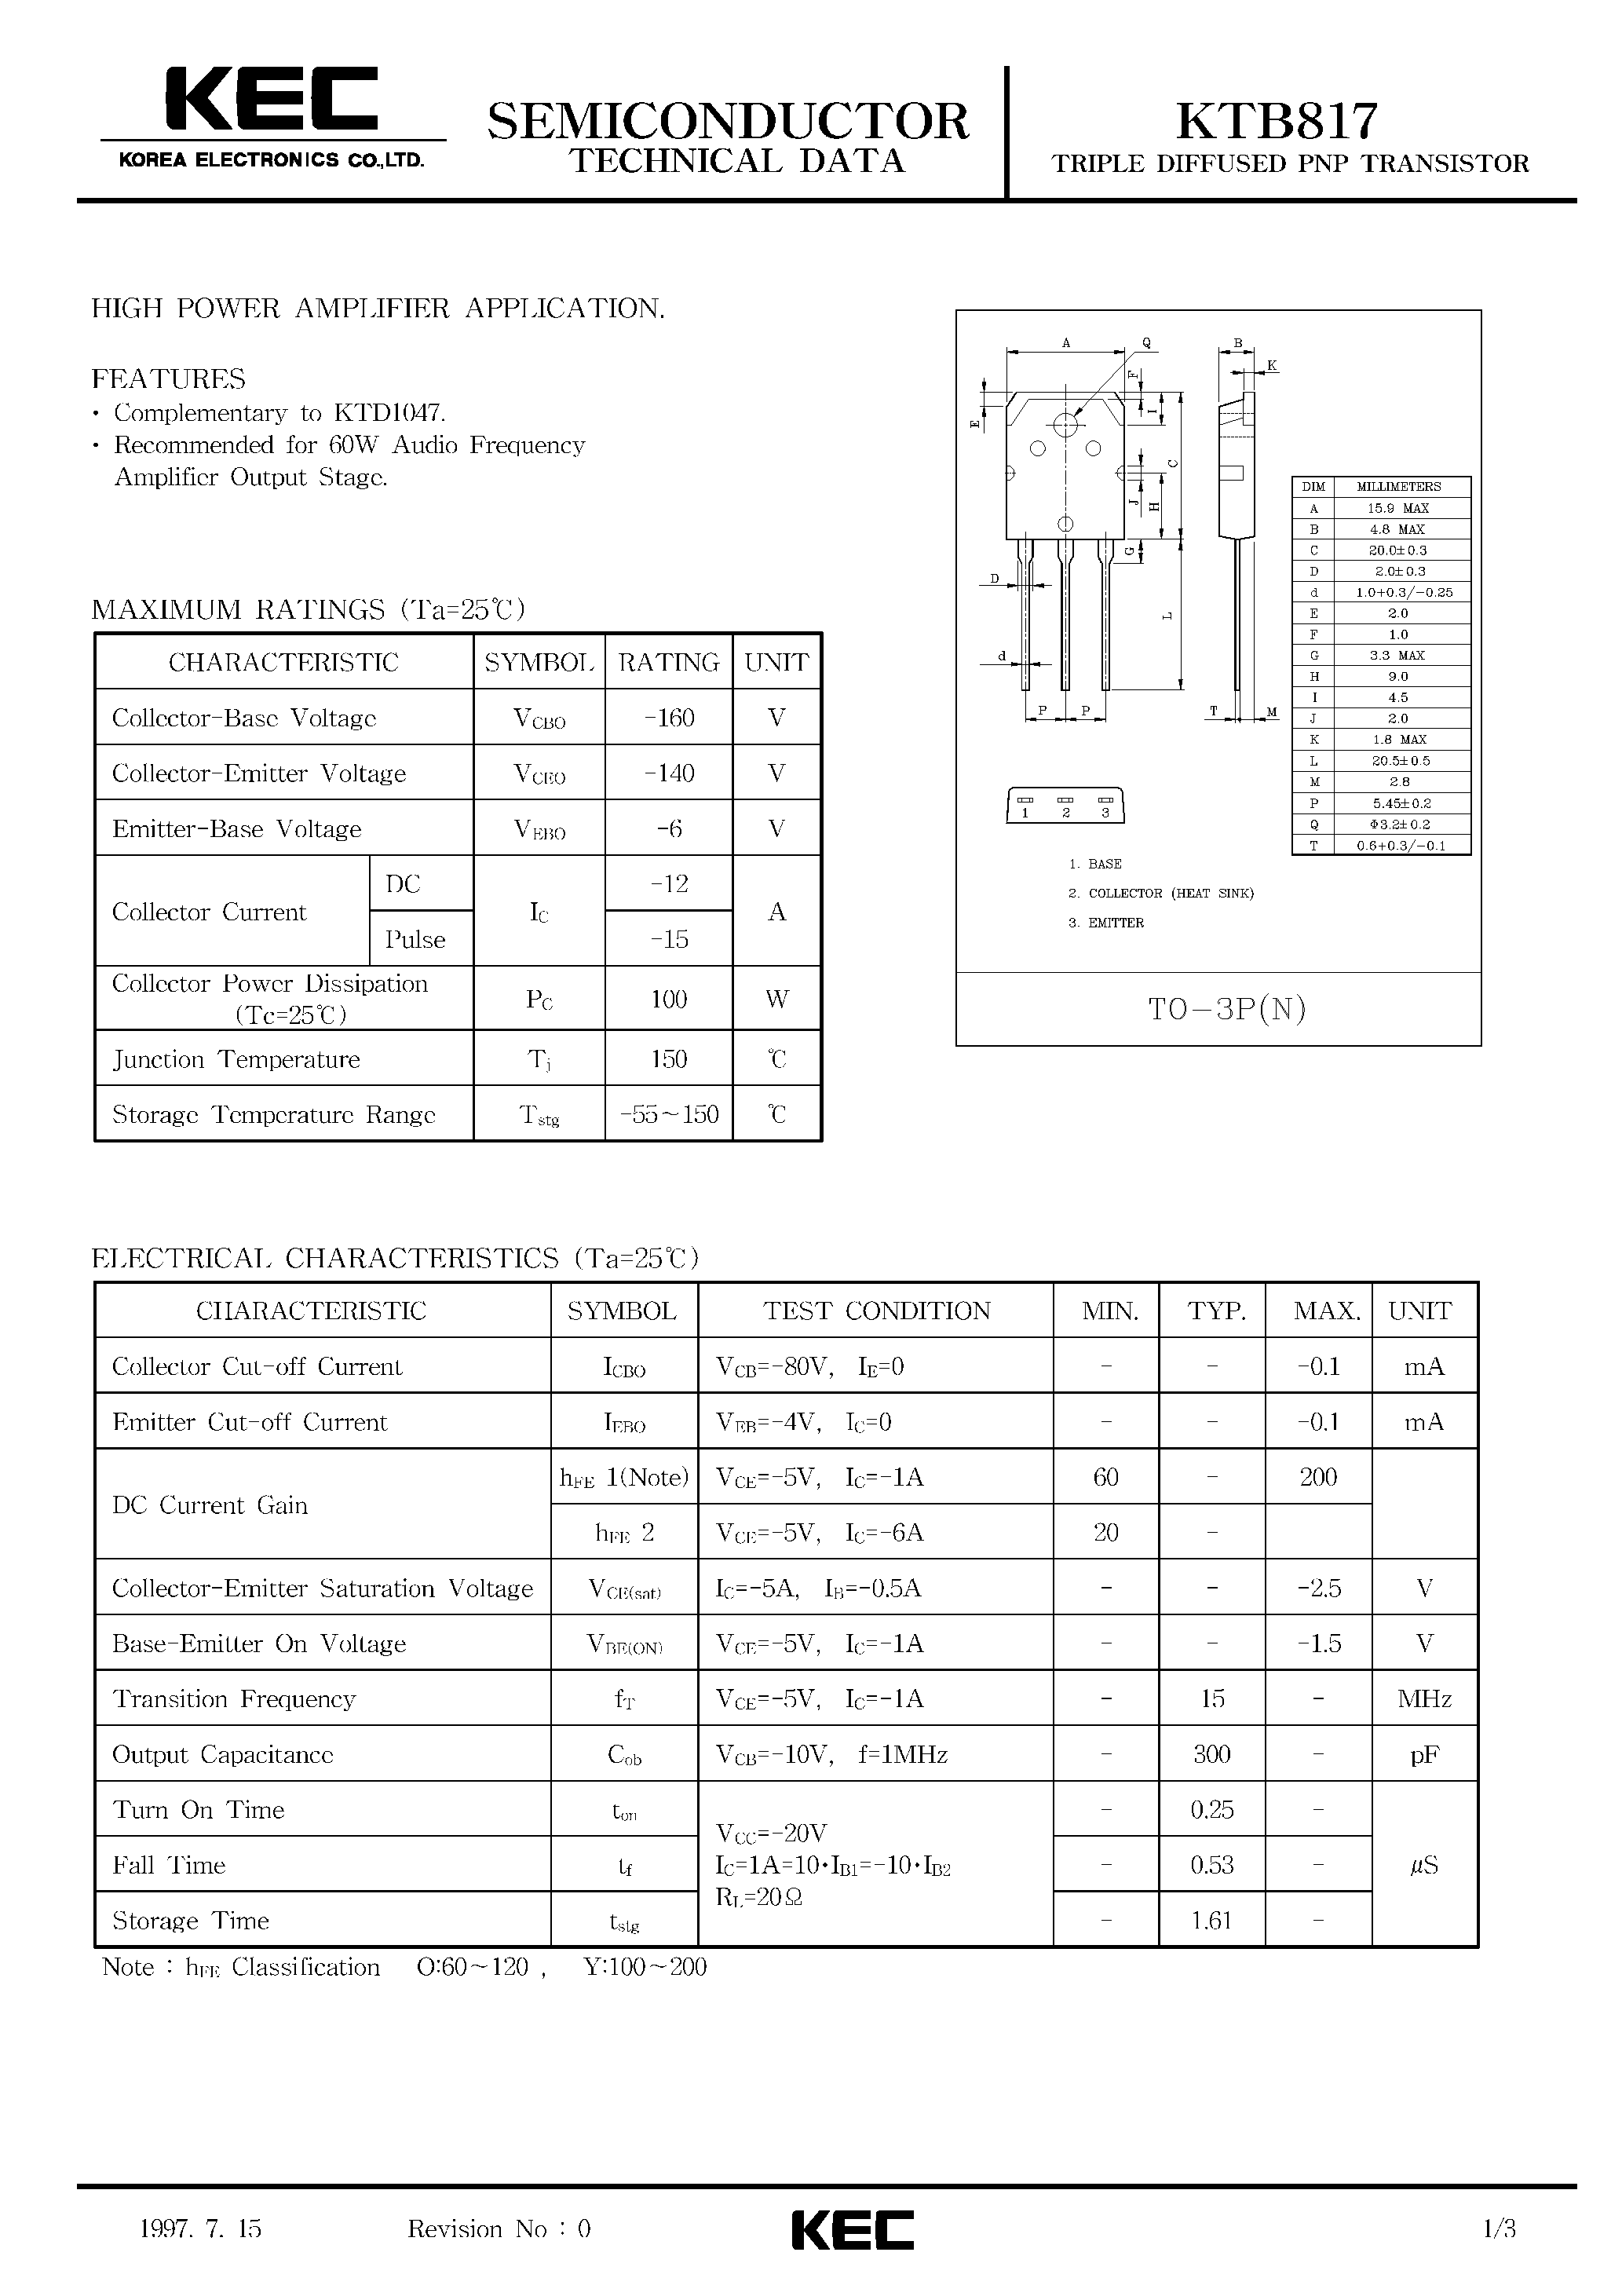 Datasheet KTB817 - TRIPLE DIFFUSED PNP TRANSISTOR(HIGH POWER AMPLIFIER) page 1